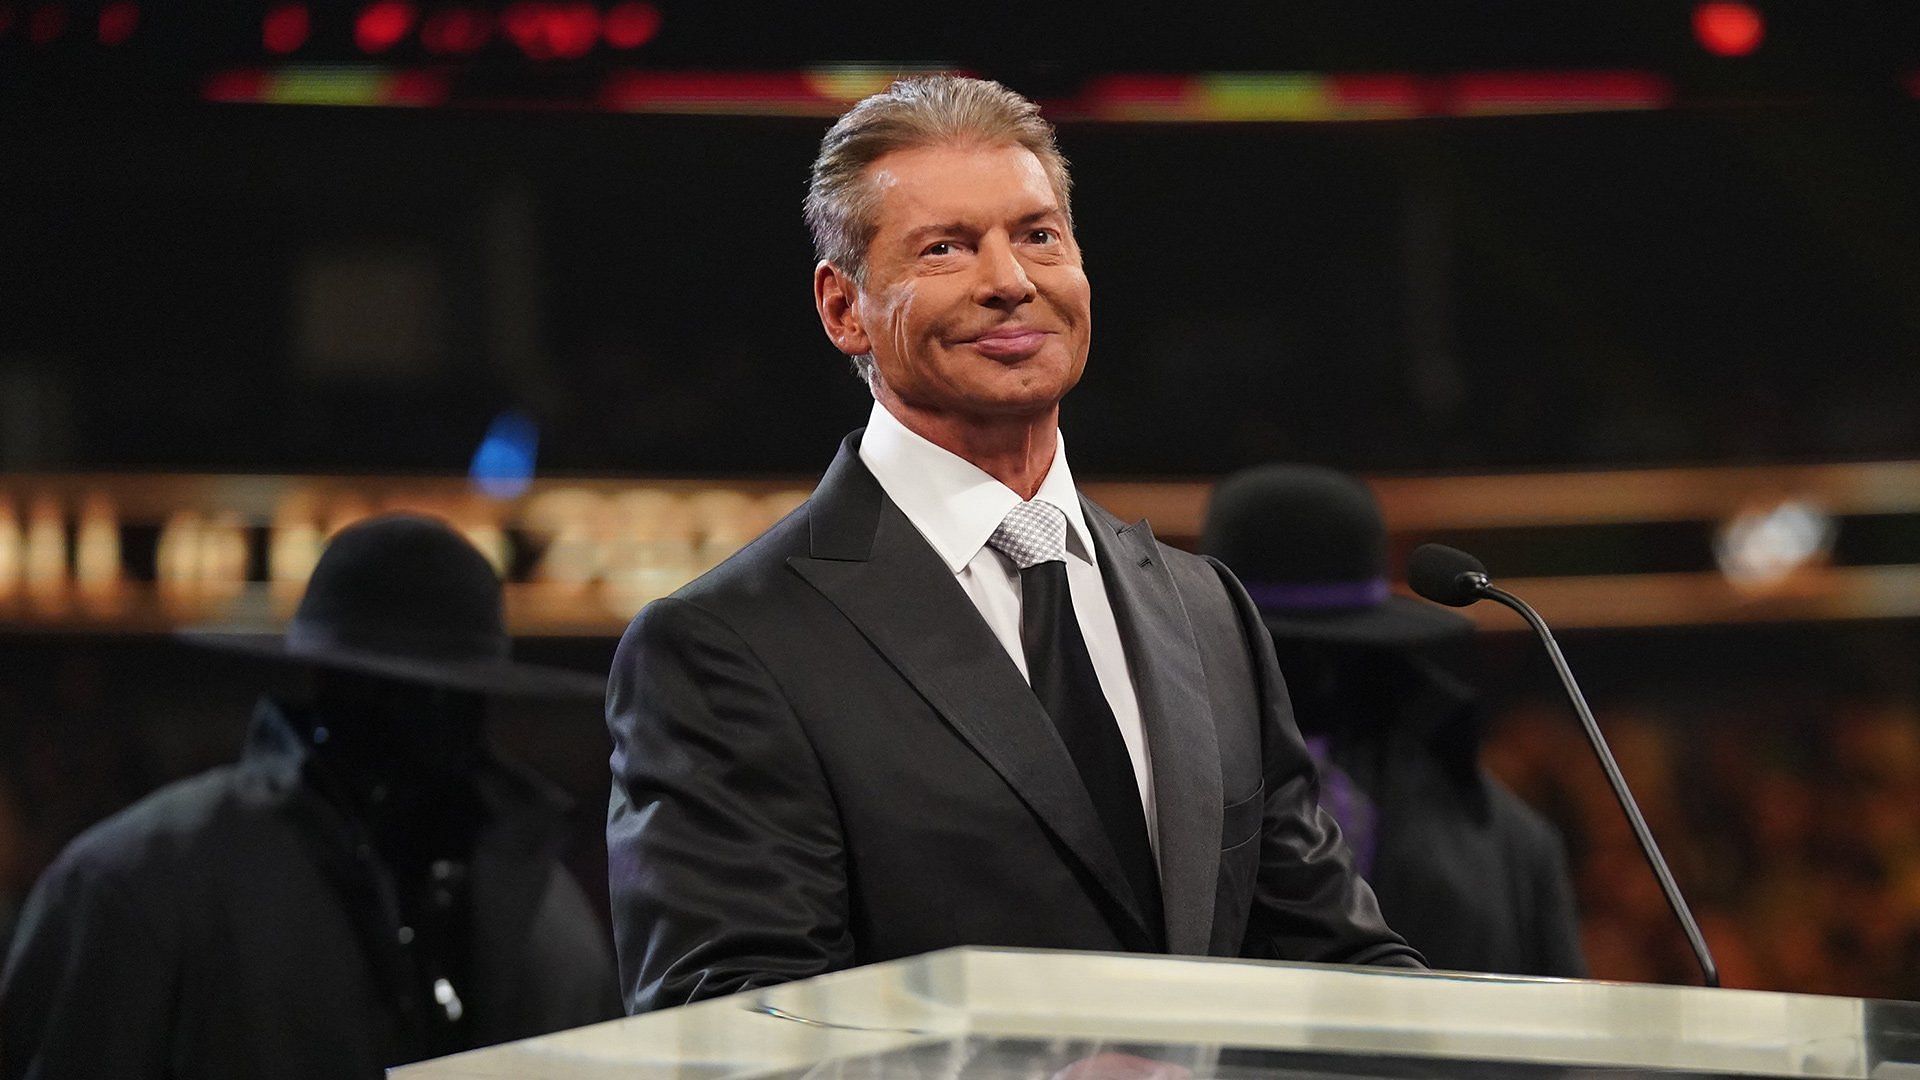 Vince McMahon at the Hall of Fame